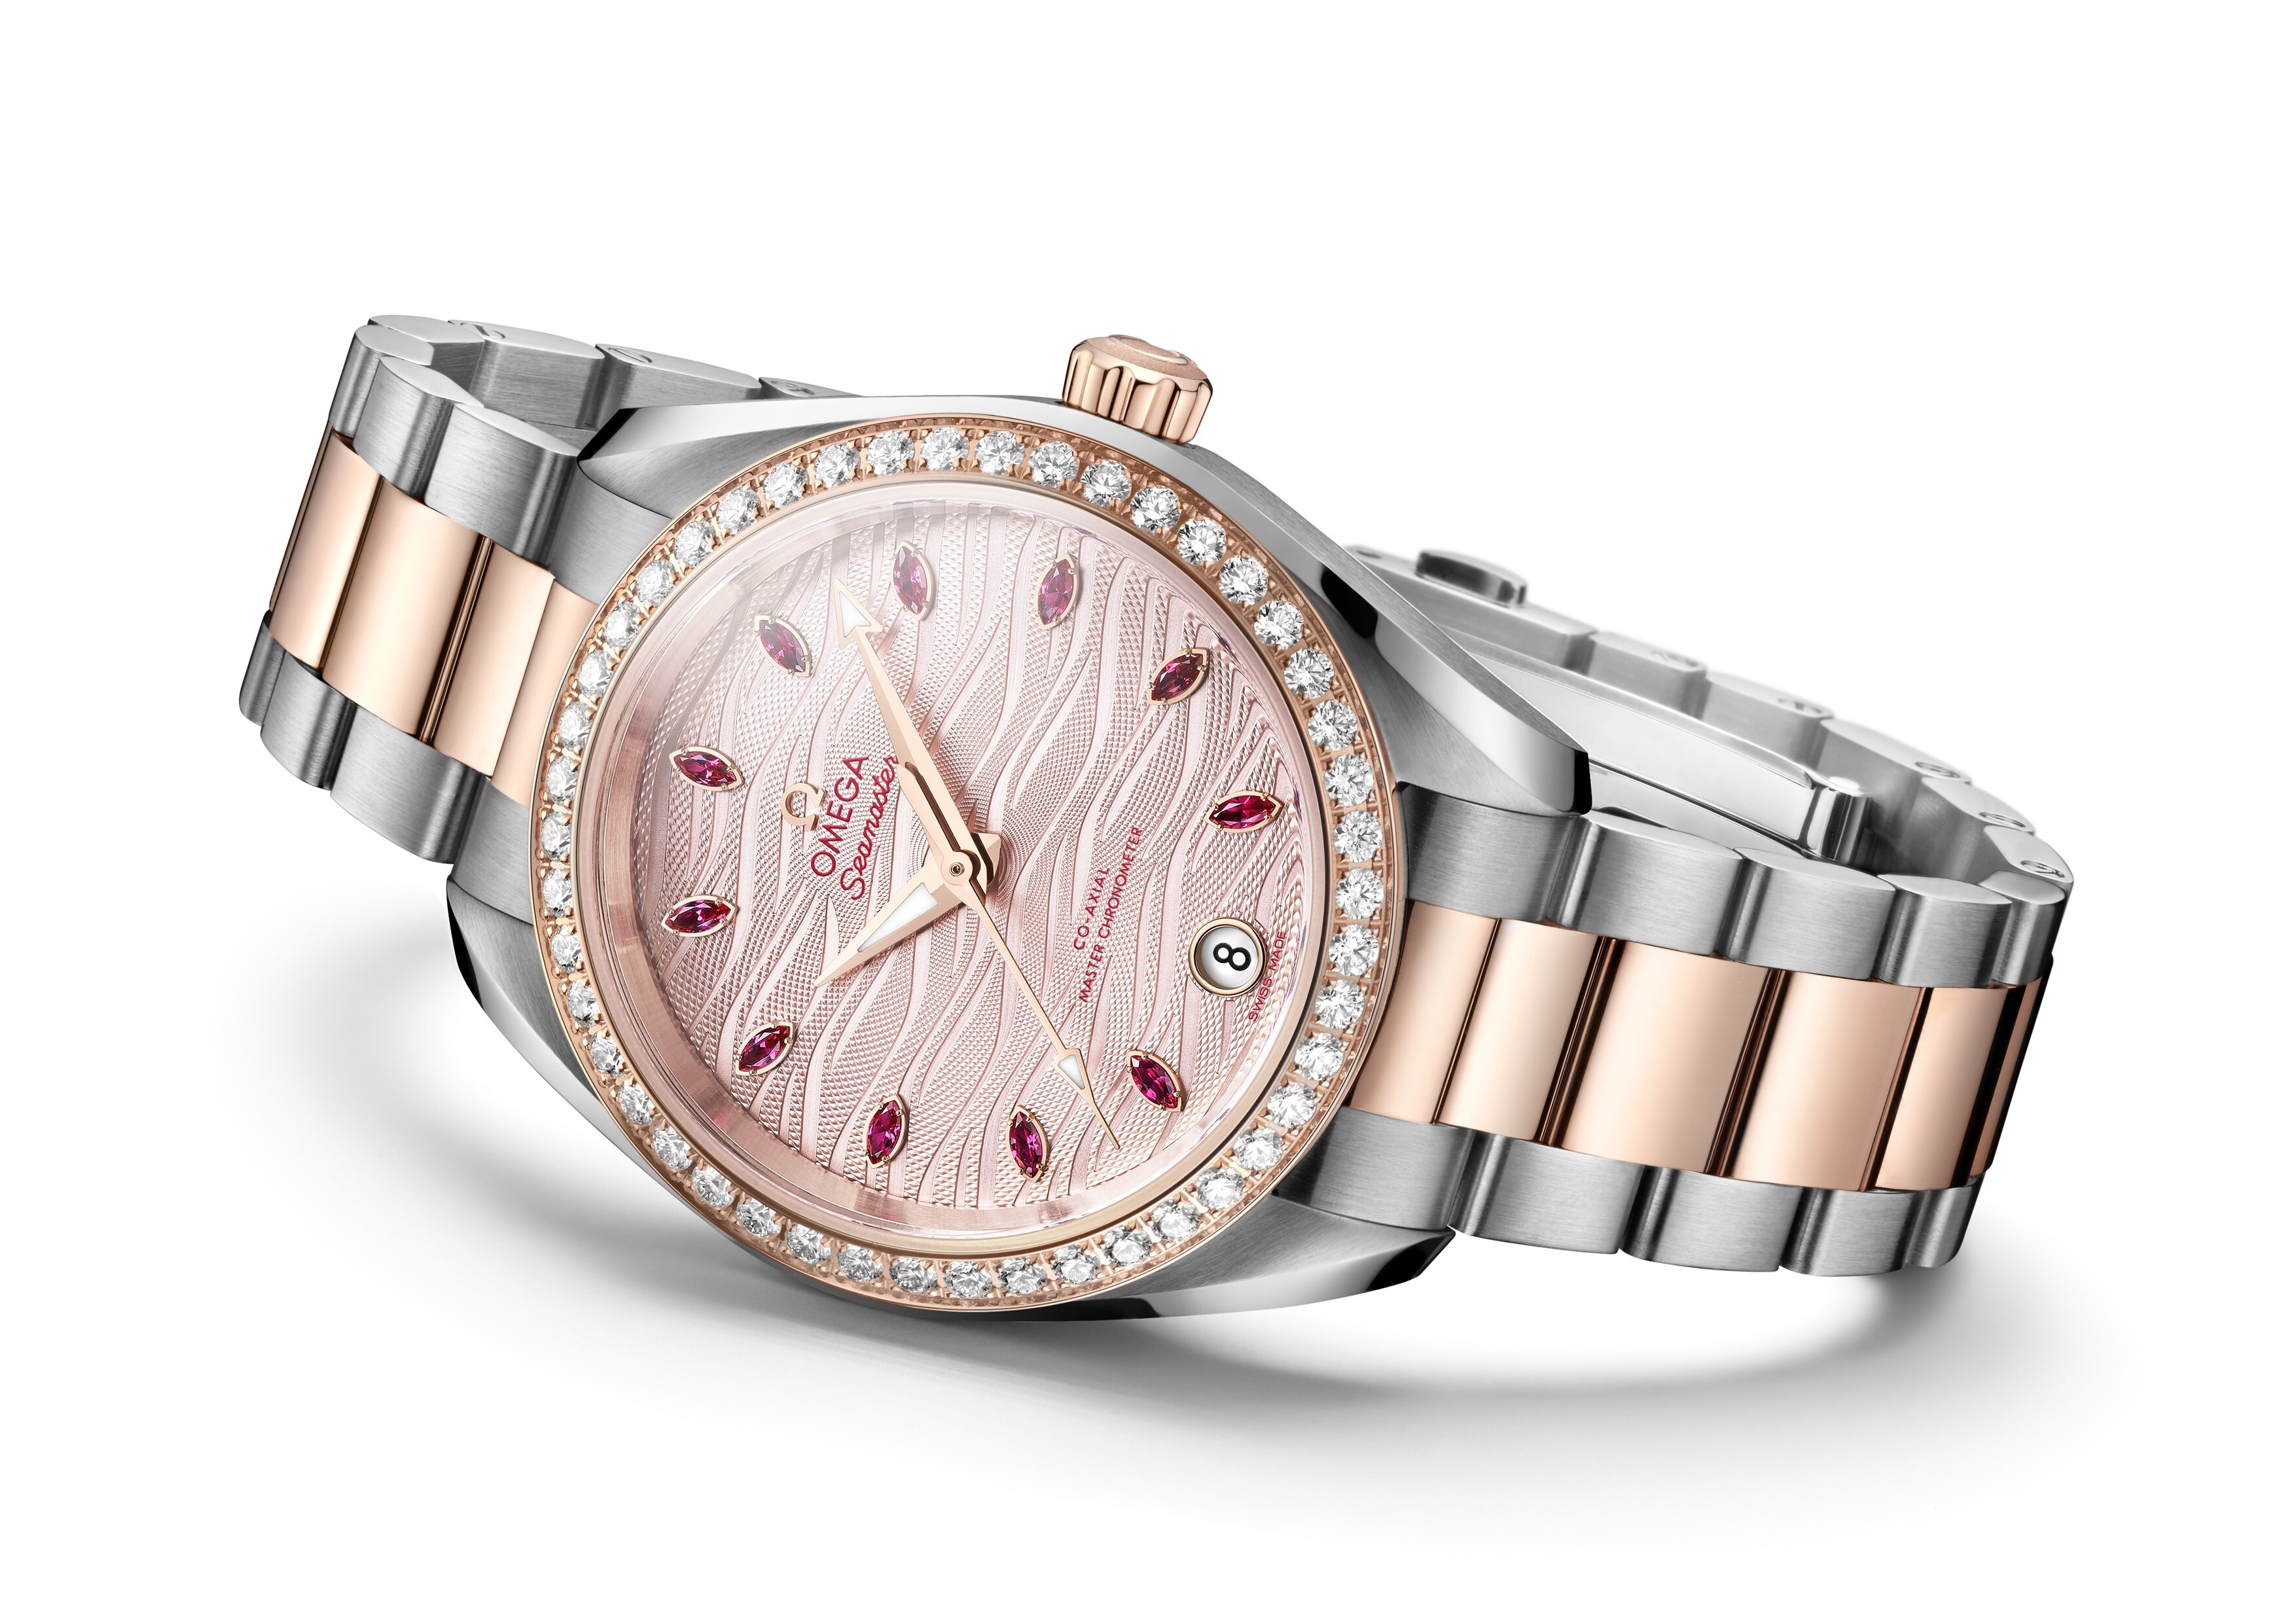 One of the new models in the Seamaster Aqua Terra collection for women features a pale pink dial with marquise-cut rubies used as hour markers. Photo: Omega